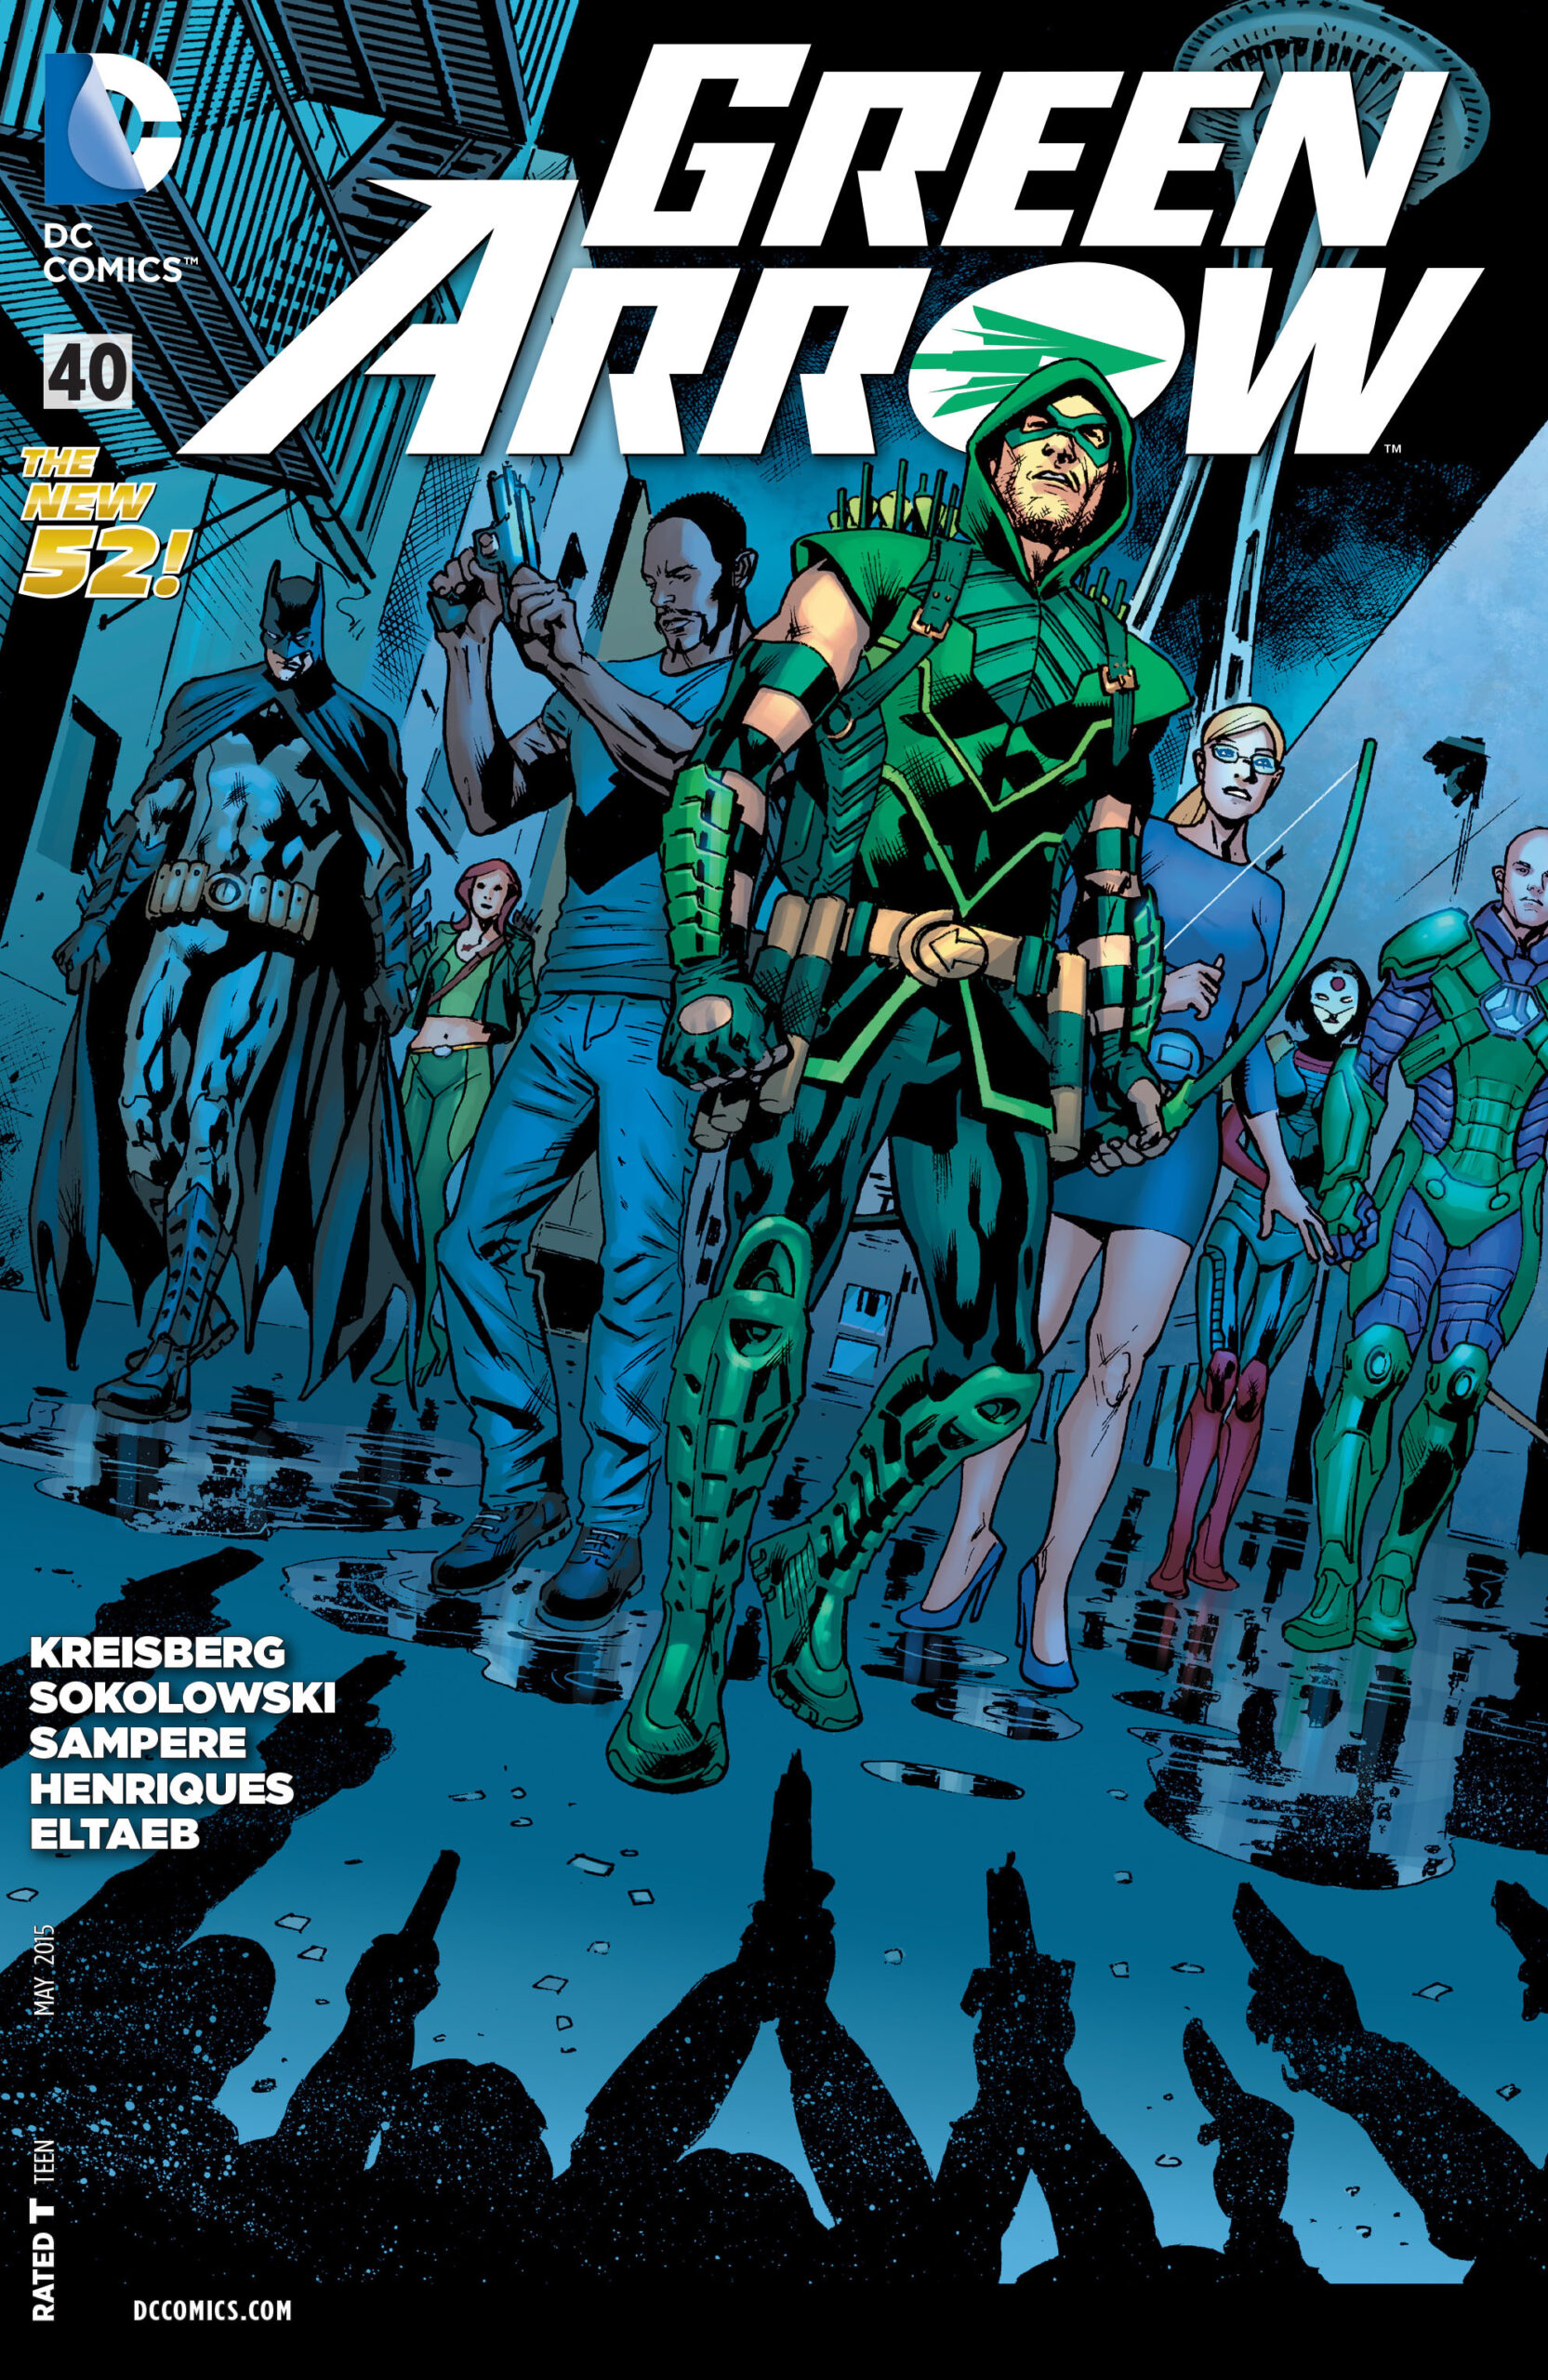 Cover art for 'Green Arrow' #40 by Bryan Hitch & Alex Sinclair